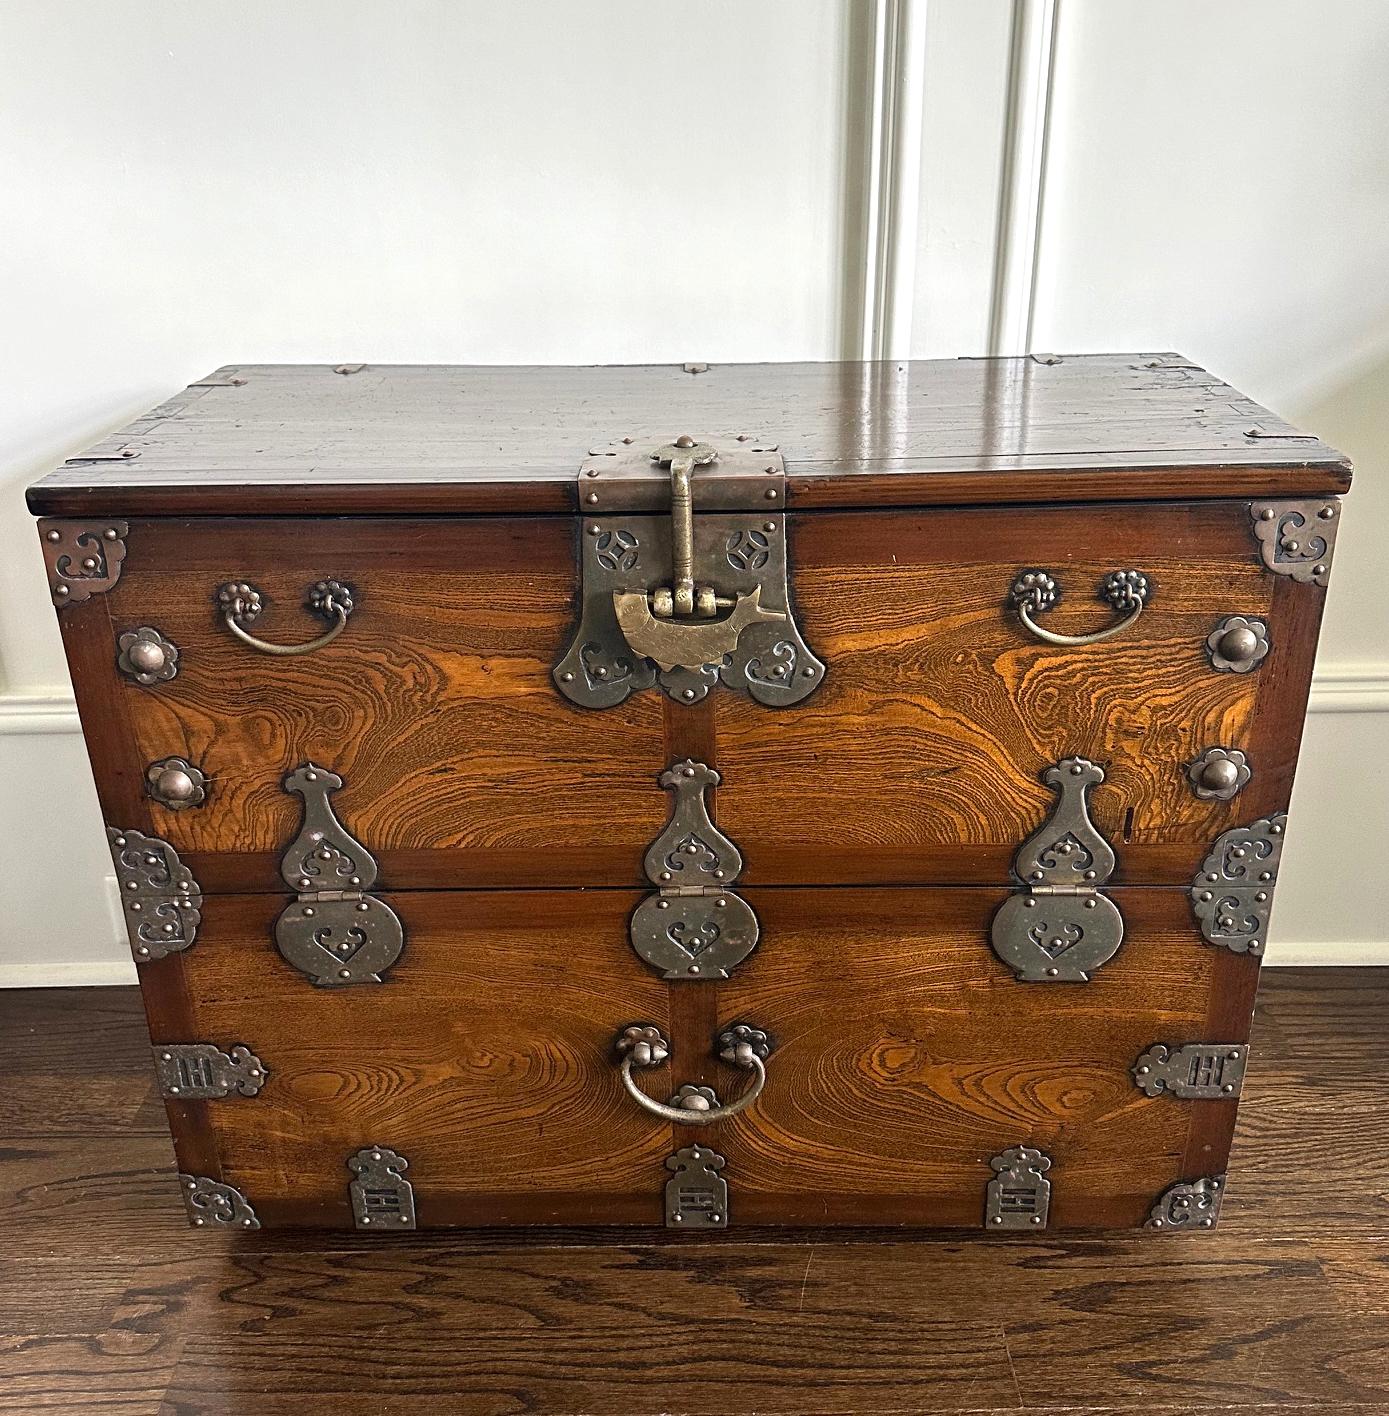 A Korean Bandaji Chest circa late 19th century (toward the end of Joseon Dynasty). Bandaji is known as drop-front half opening chest and was traditionally used to store household valuables and beddings. This well-proportioned Bandaji on offer was a